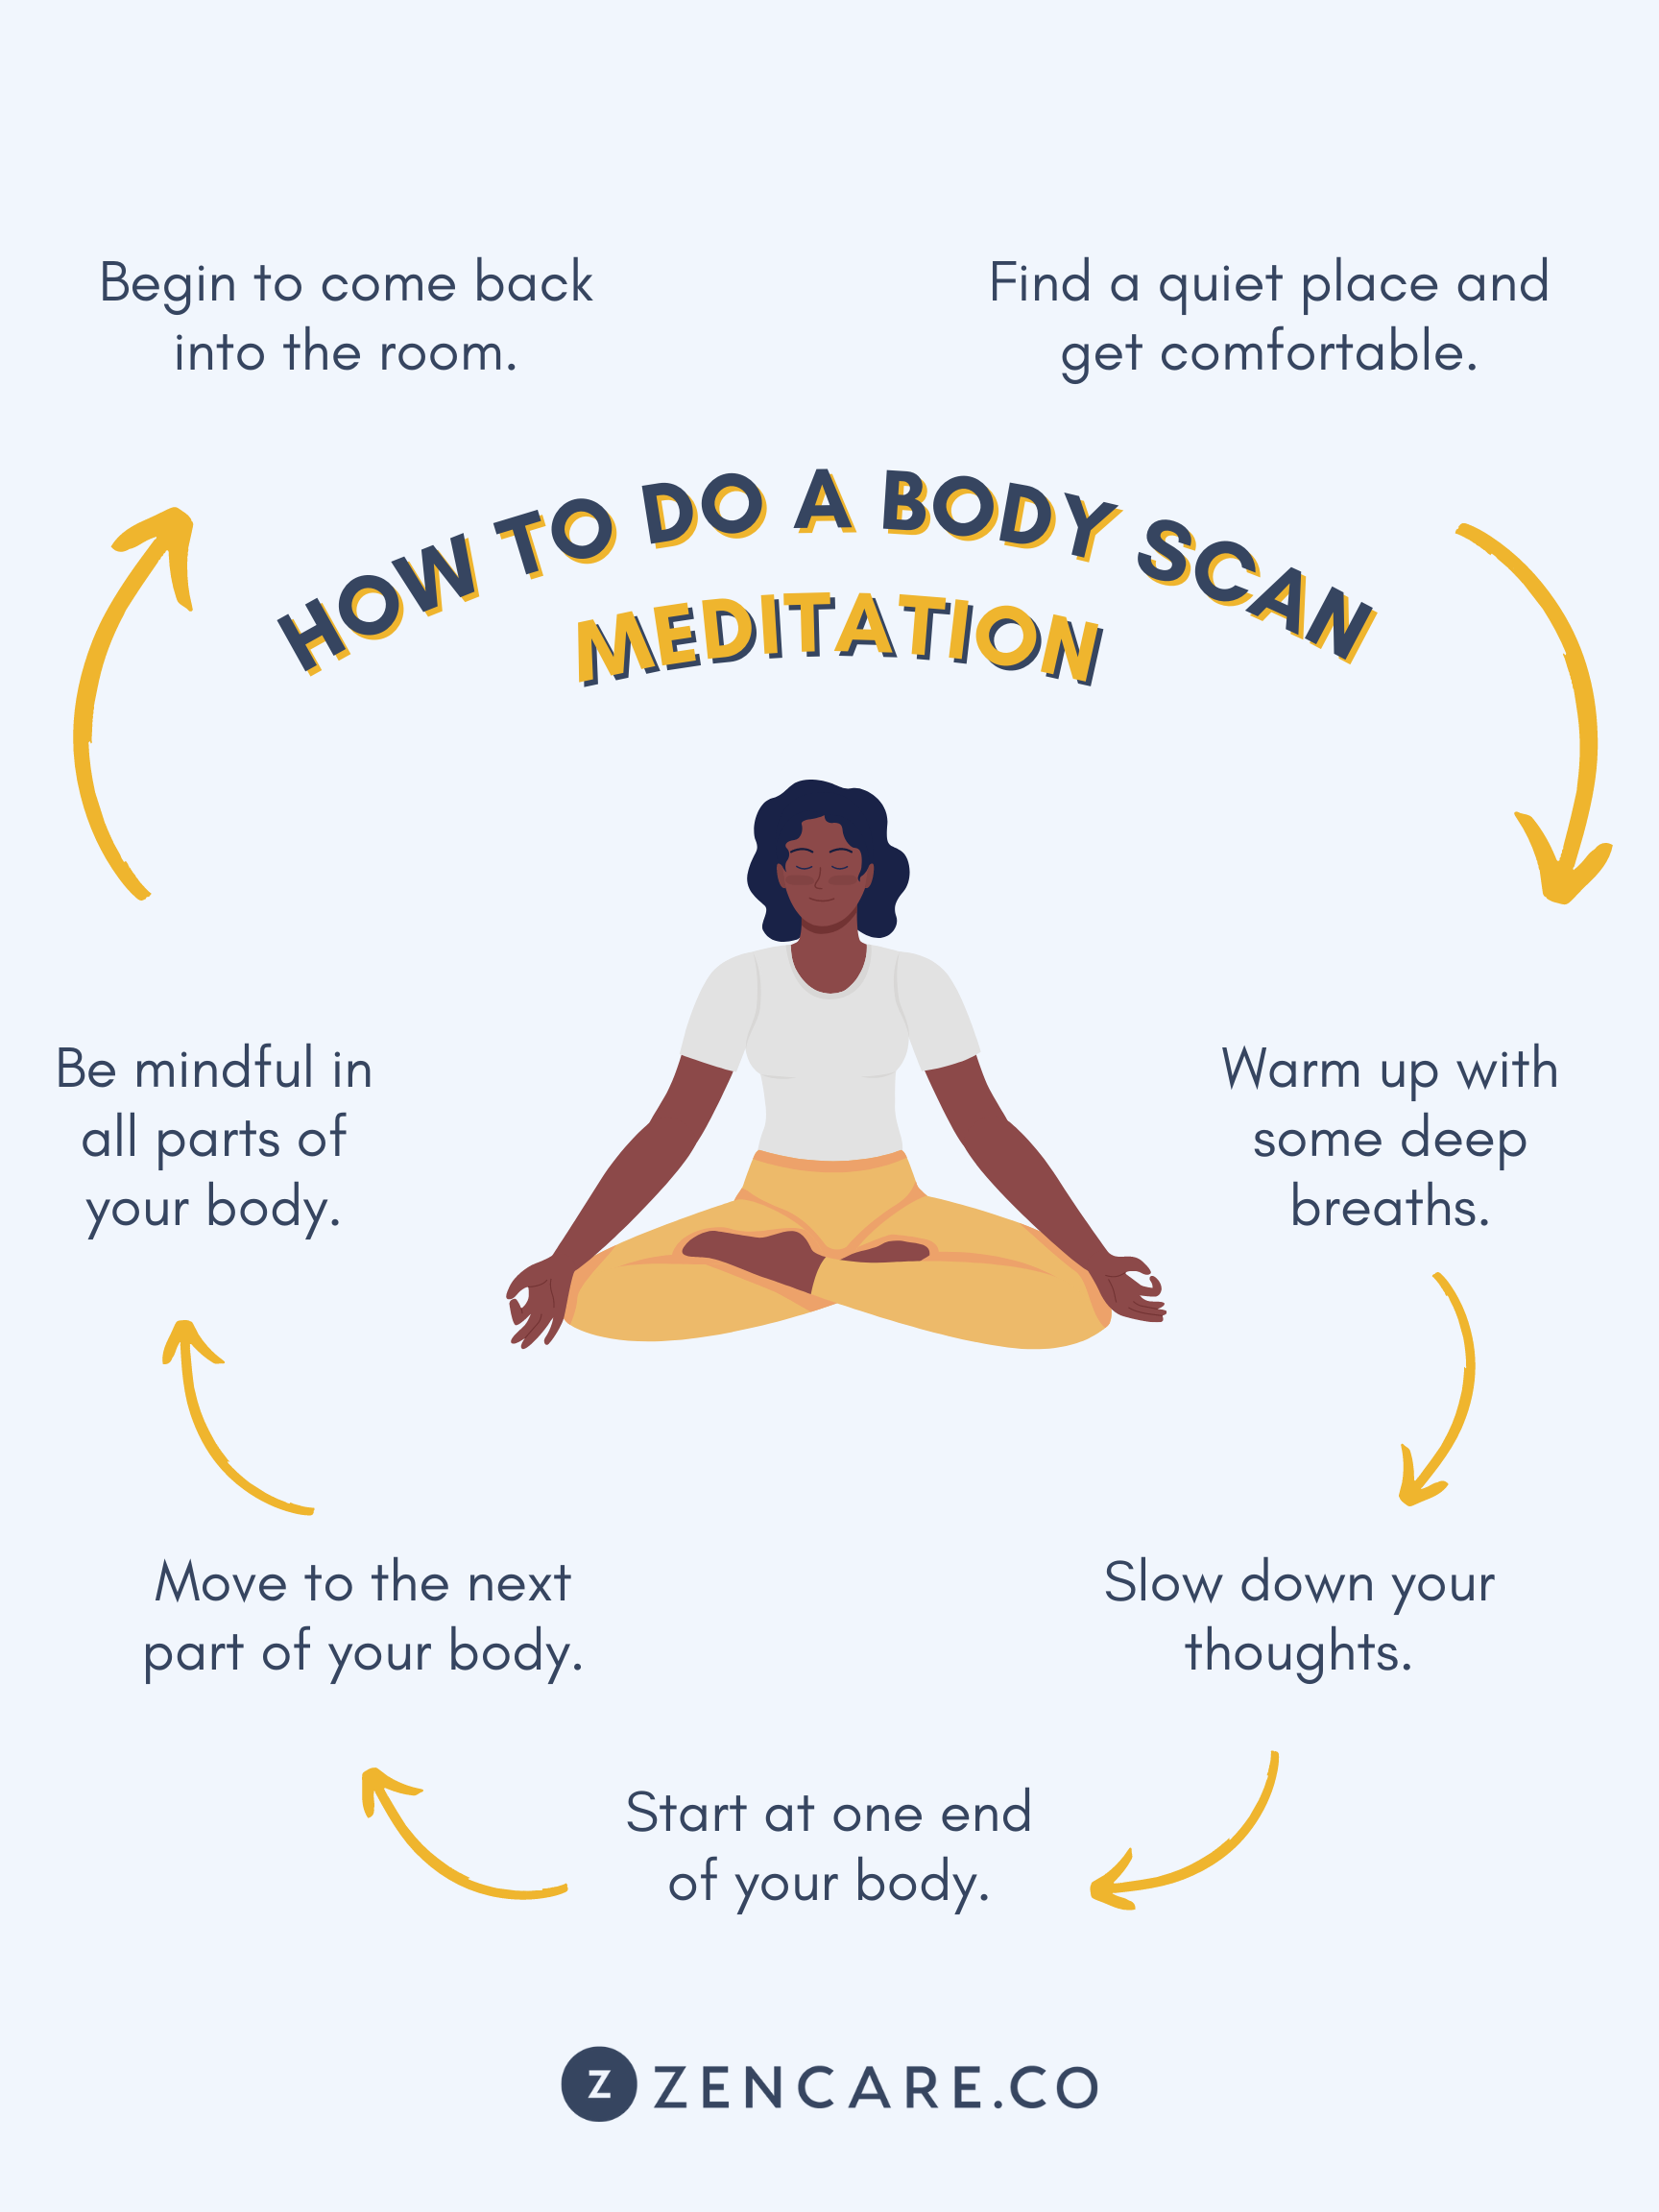 How to Do Body Scan Meditation and Its Benefits